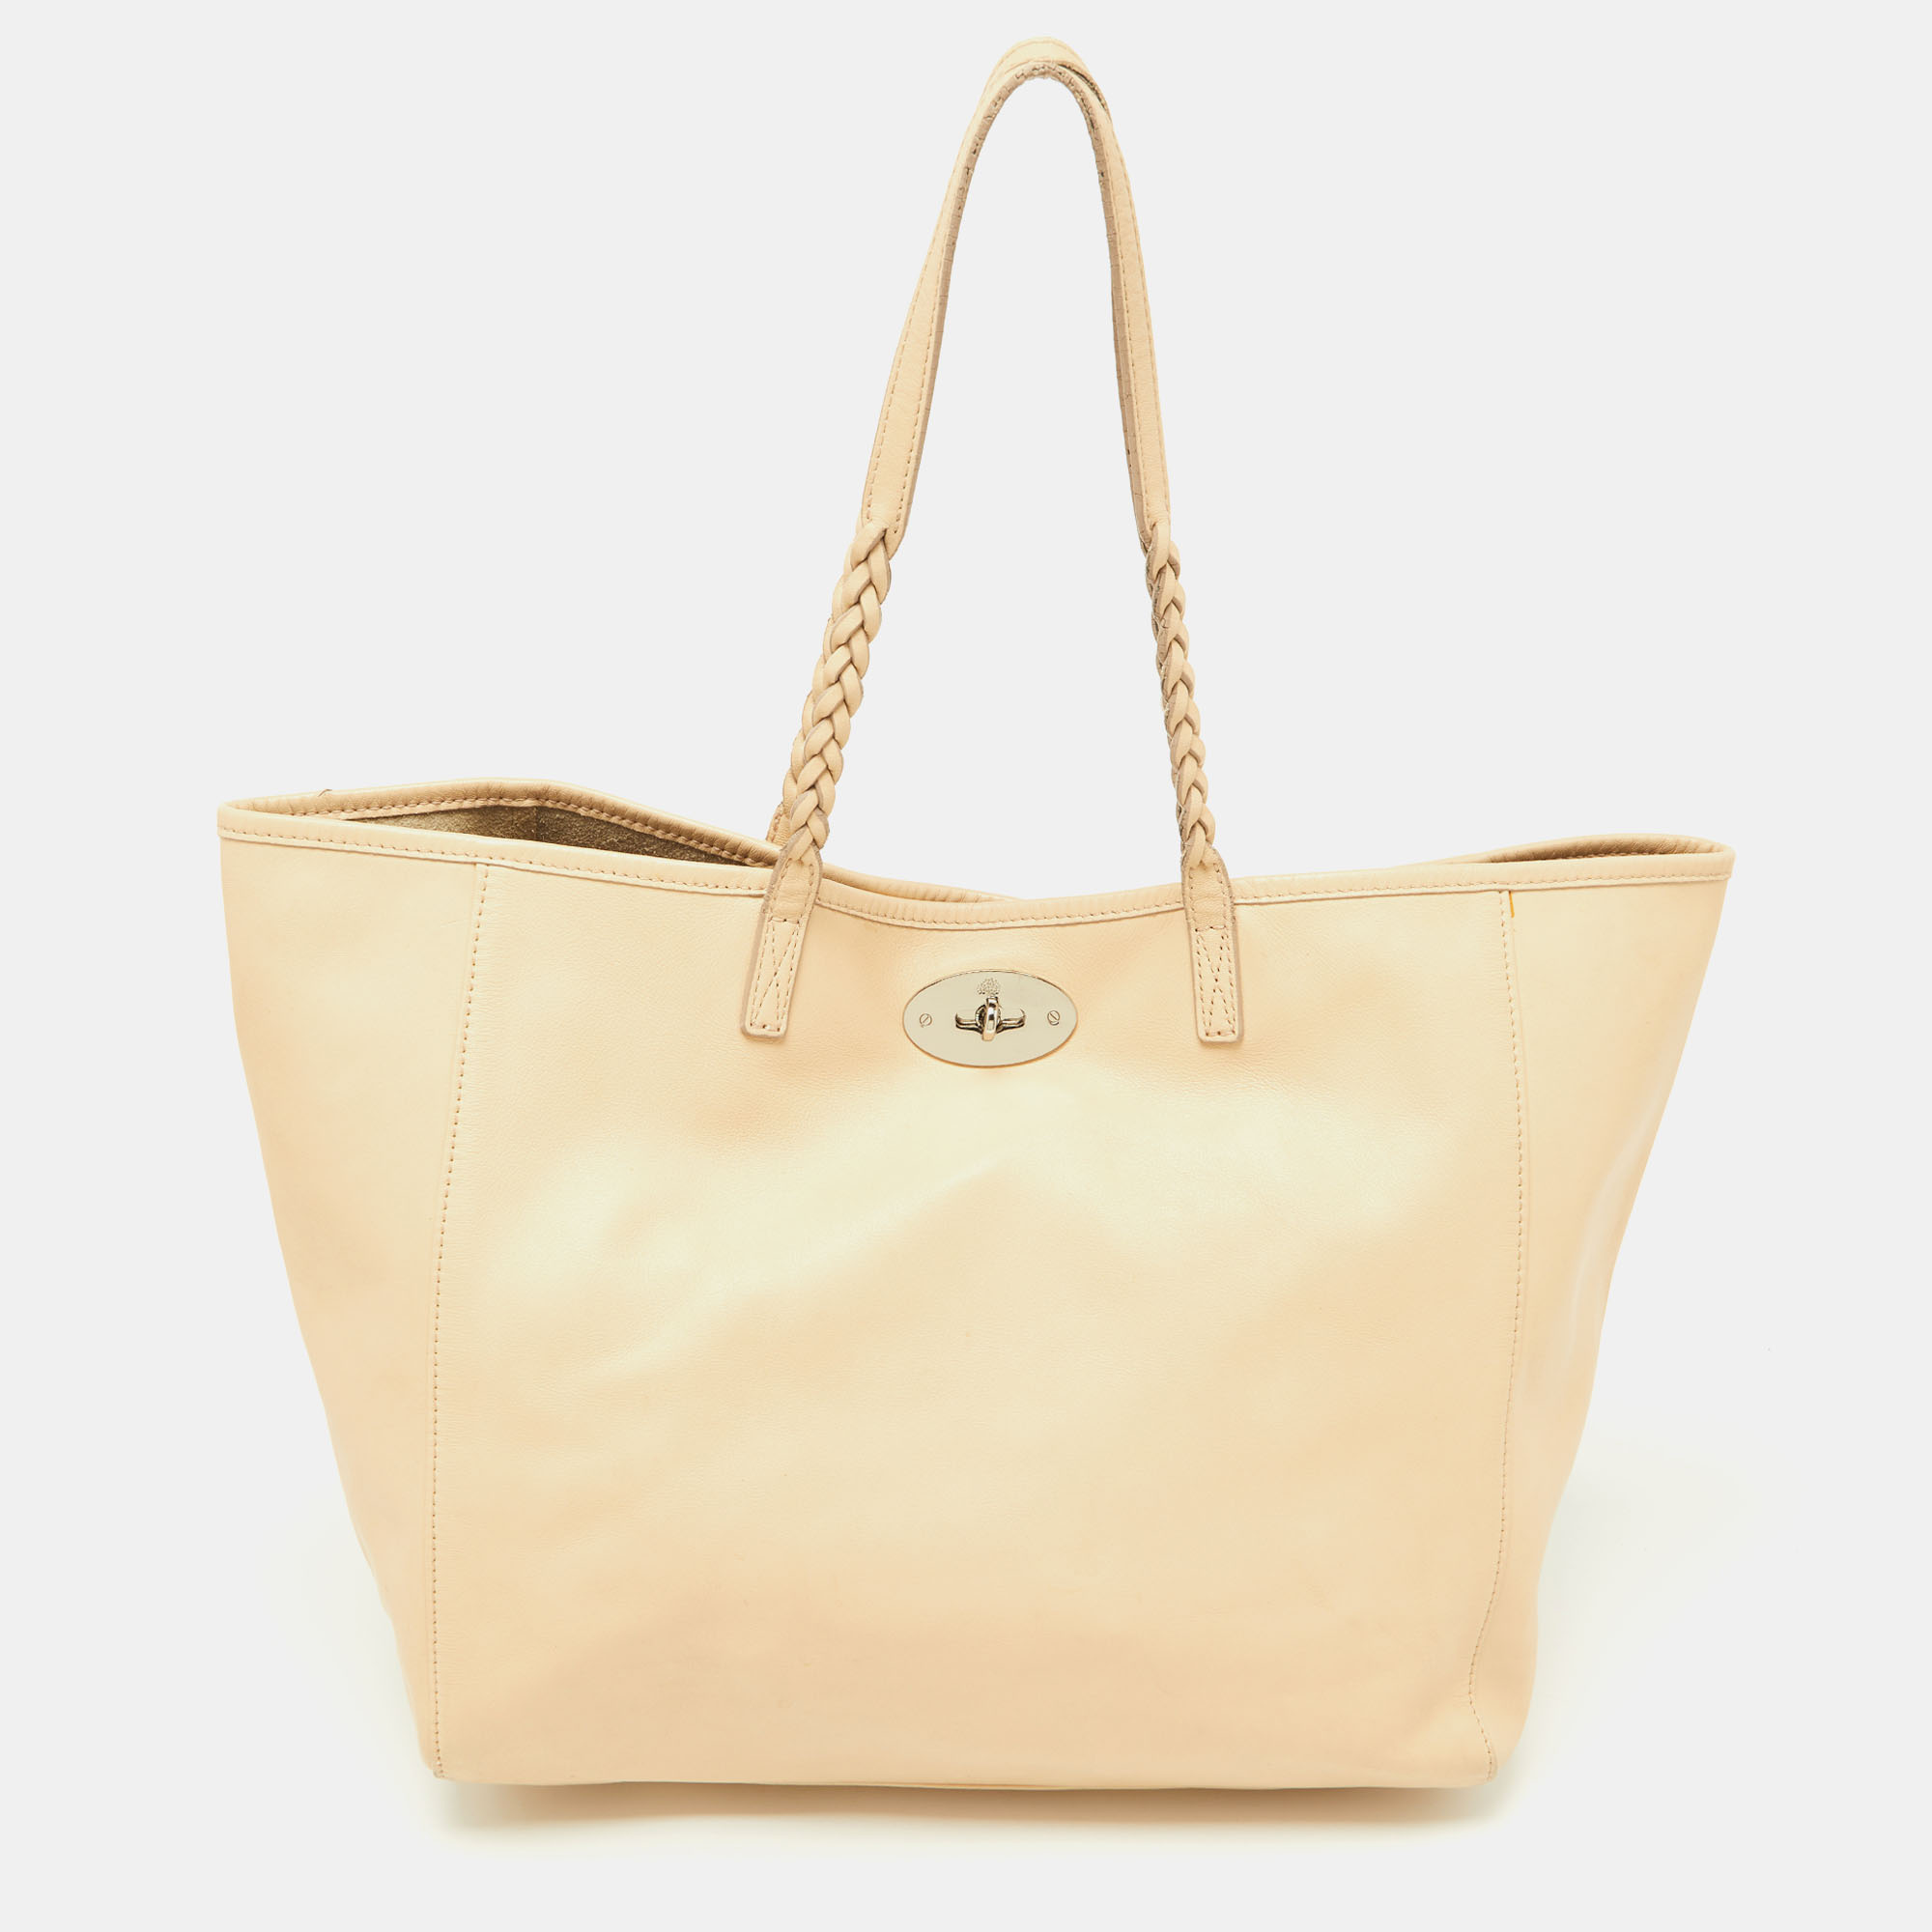 Indulge in timeless luxury with this Mulberry tote. Meticulously handcrafted this iconic piece combines heritage elegance and craftsmanship elevating your style to a level of unmatched sophistication.